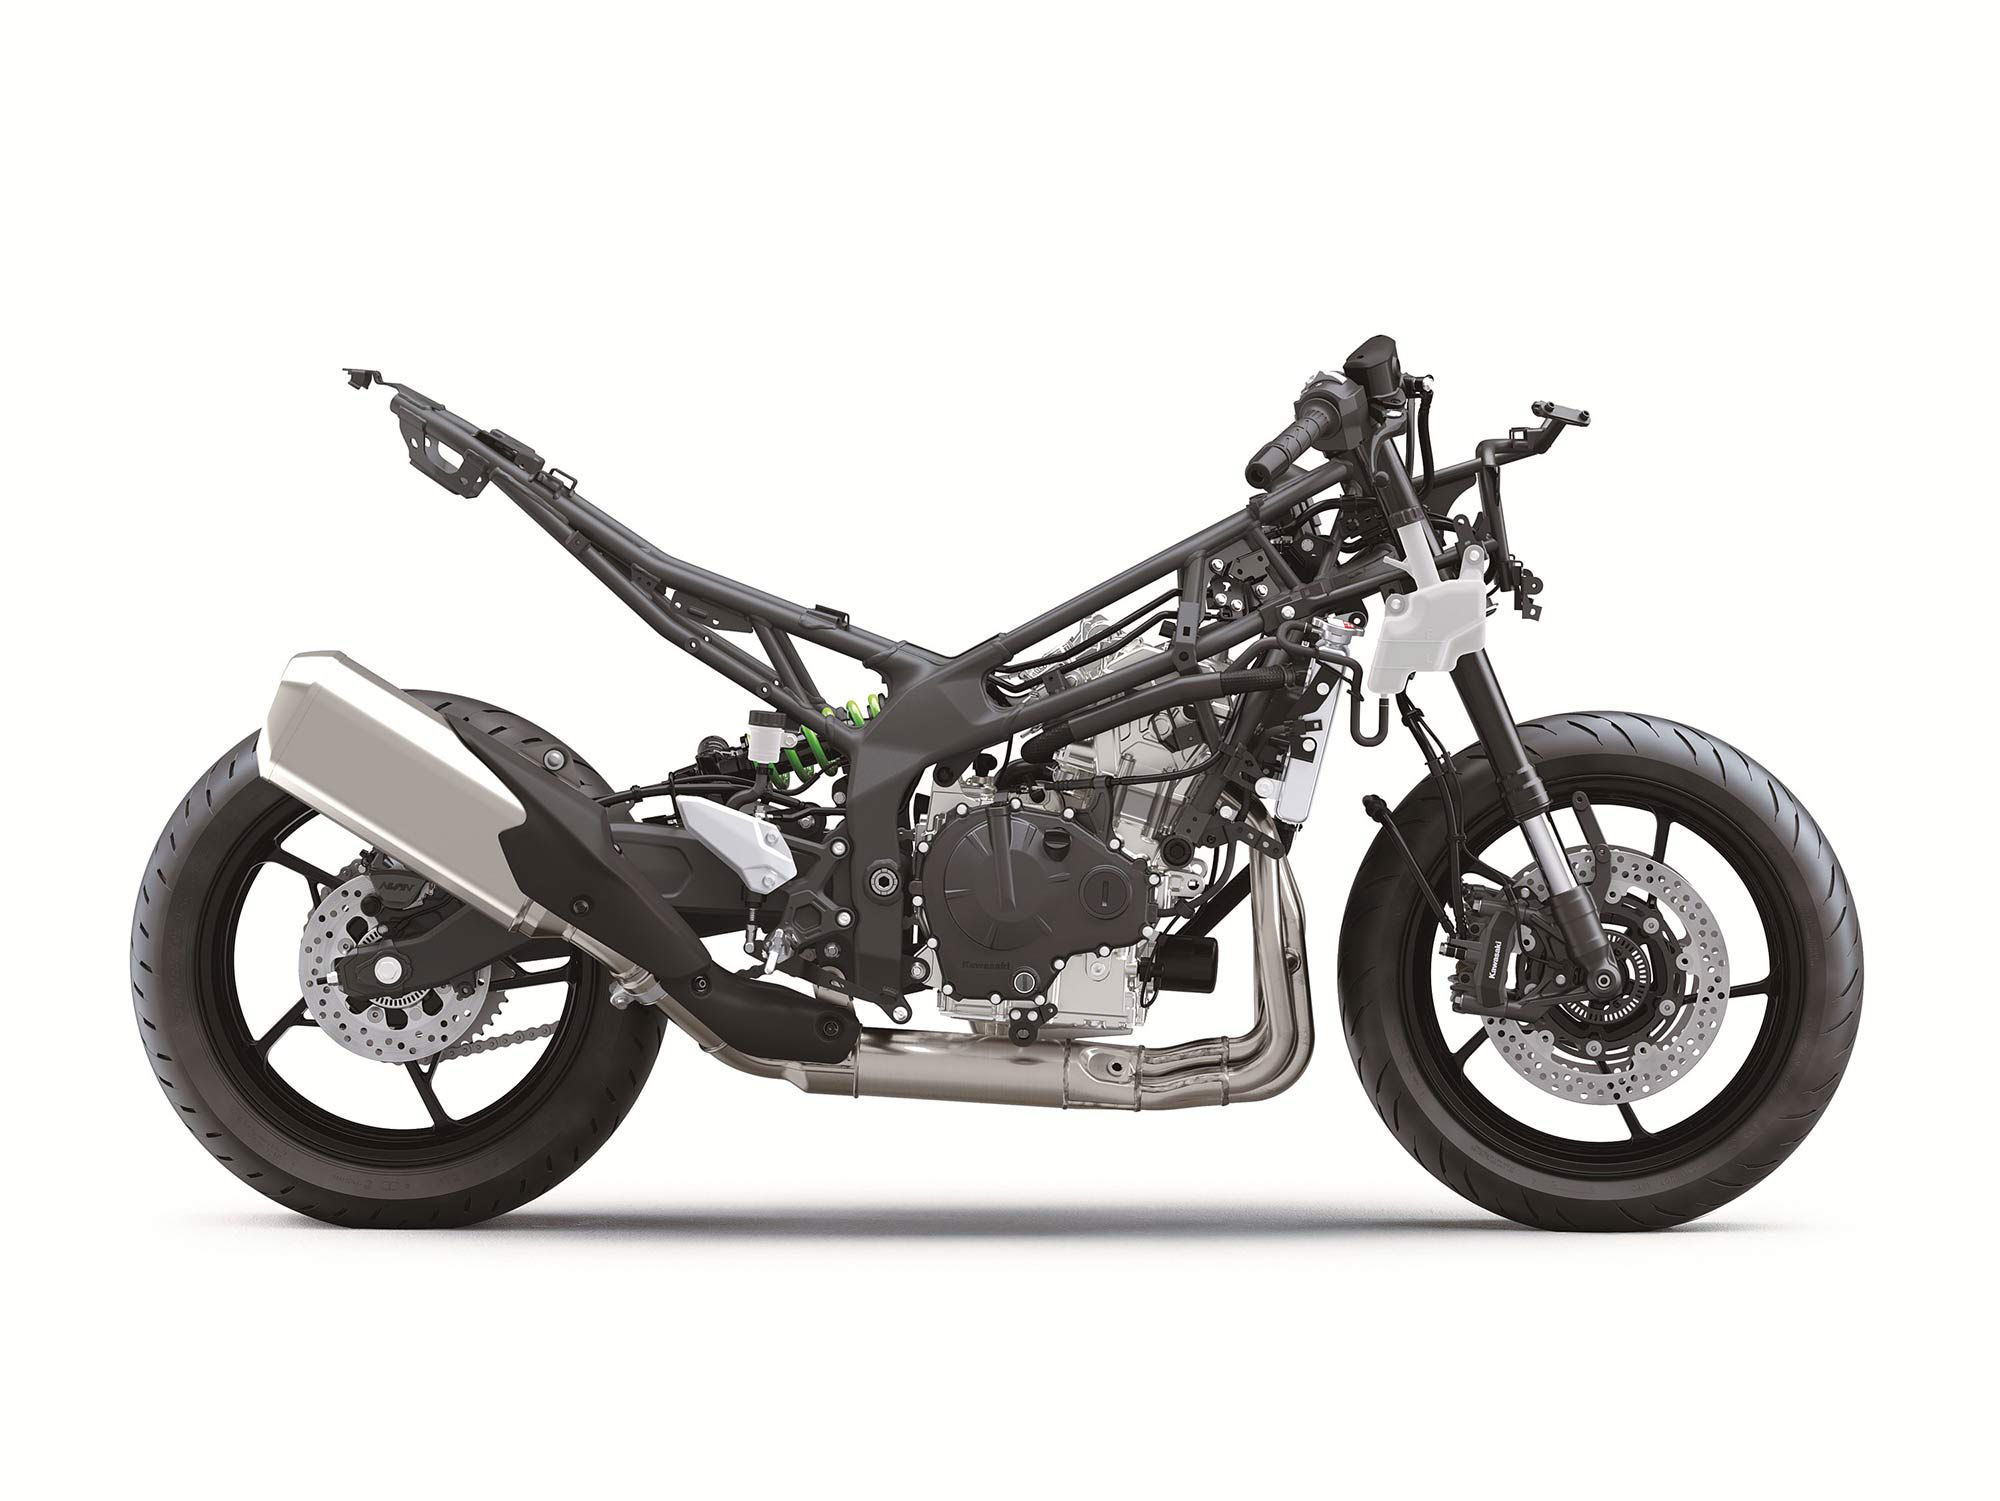 The ZX-4RR uses a cost-effective steel-trellis frame and a steel banana-style swingarm. The wheelbase measures 54.3 inches, identical to the Asian-market Kawasaki ZX-25R that the 4RR is largely based on.